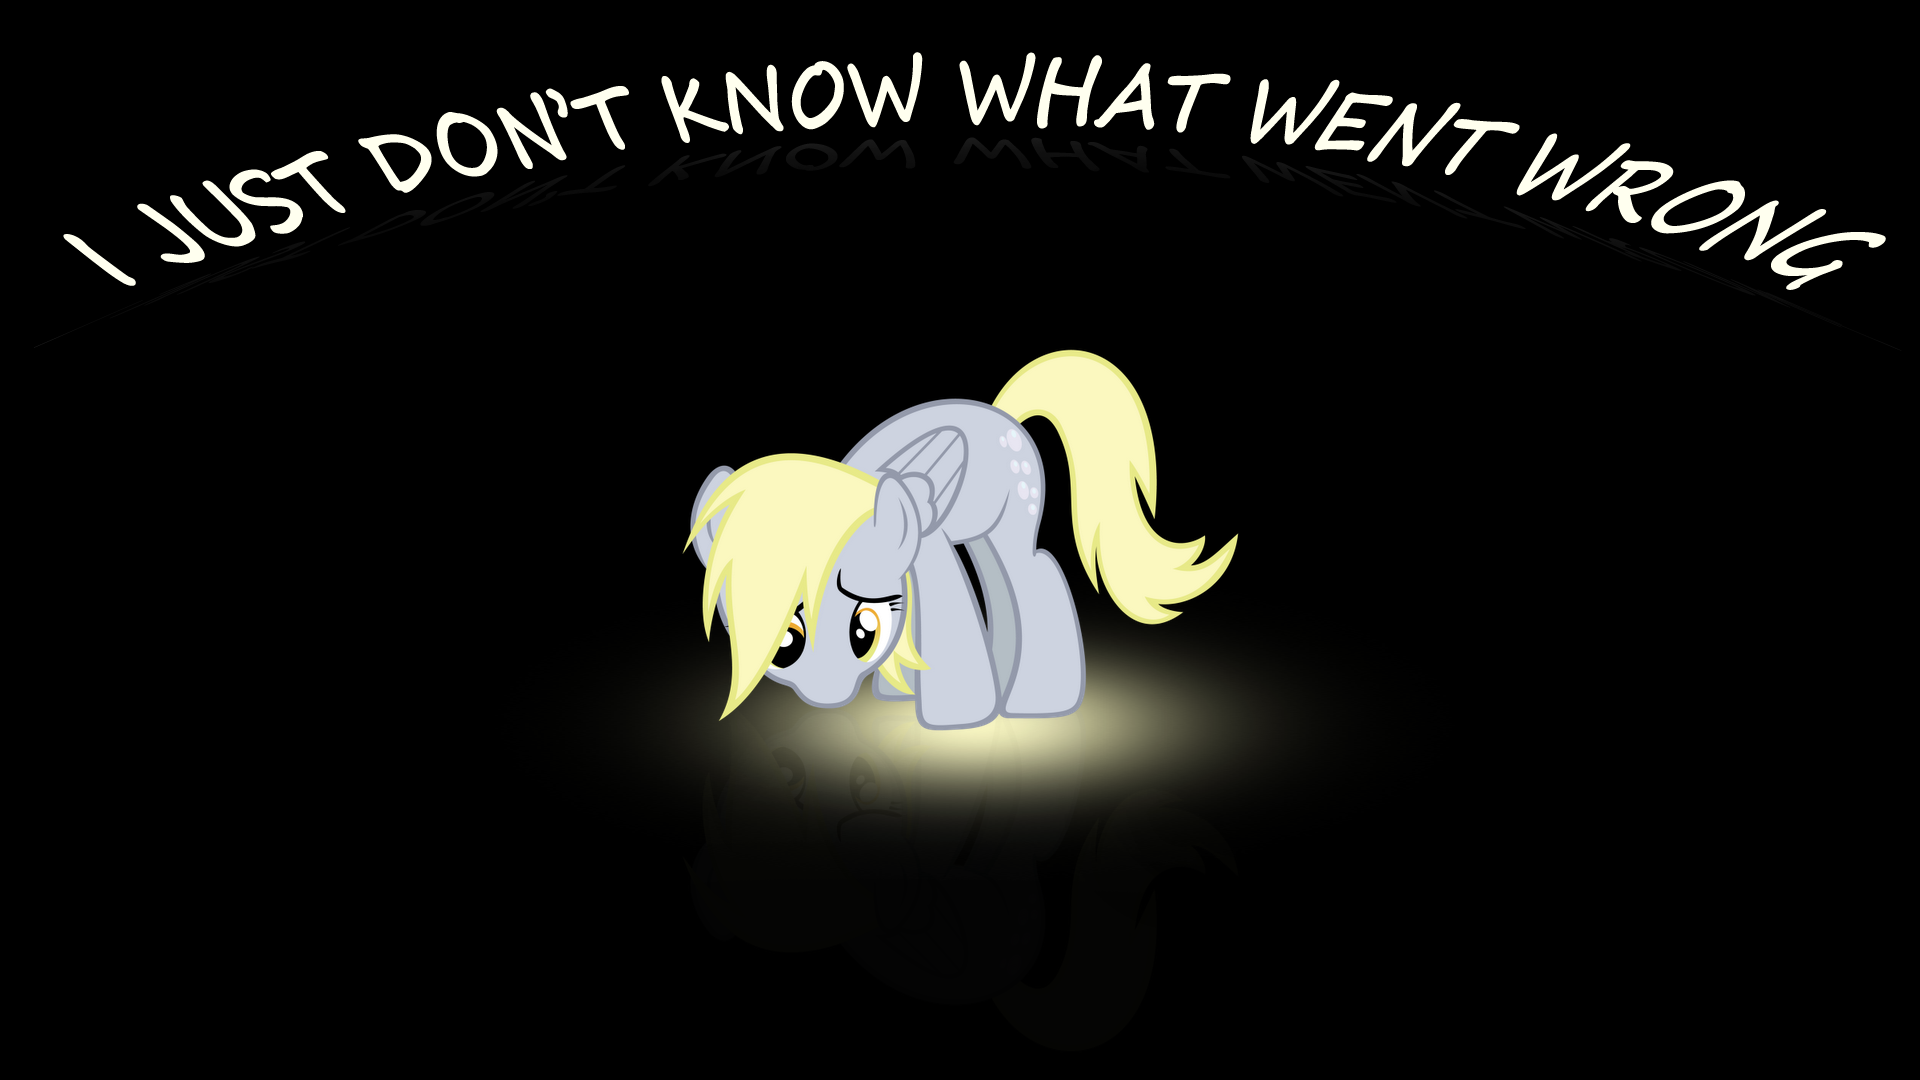 I_just_don_t_know_what_went_wrong_derpy_wallpaper_by_rhubarb_leaf-d4opp0h.png